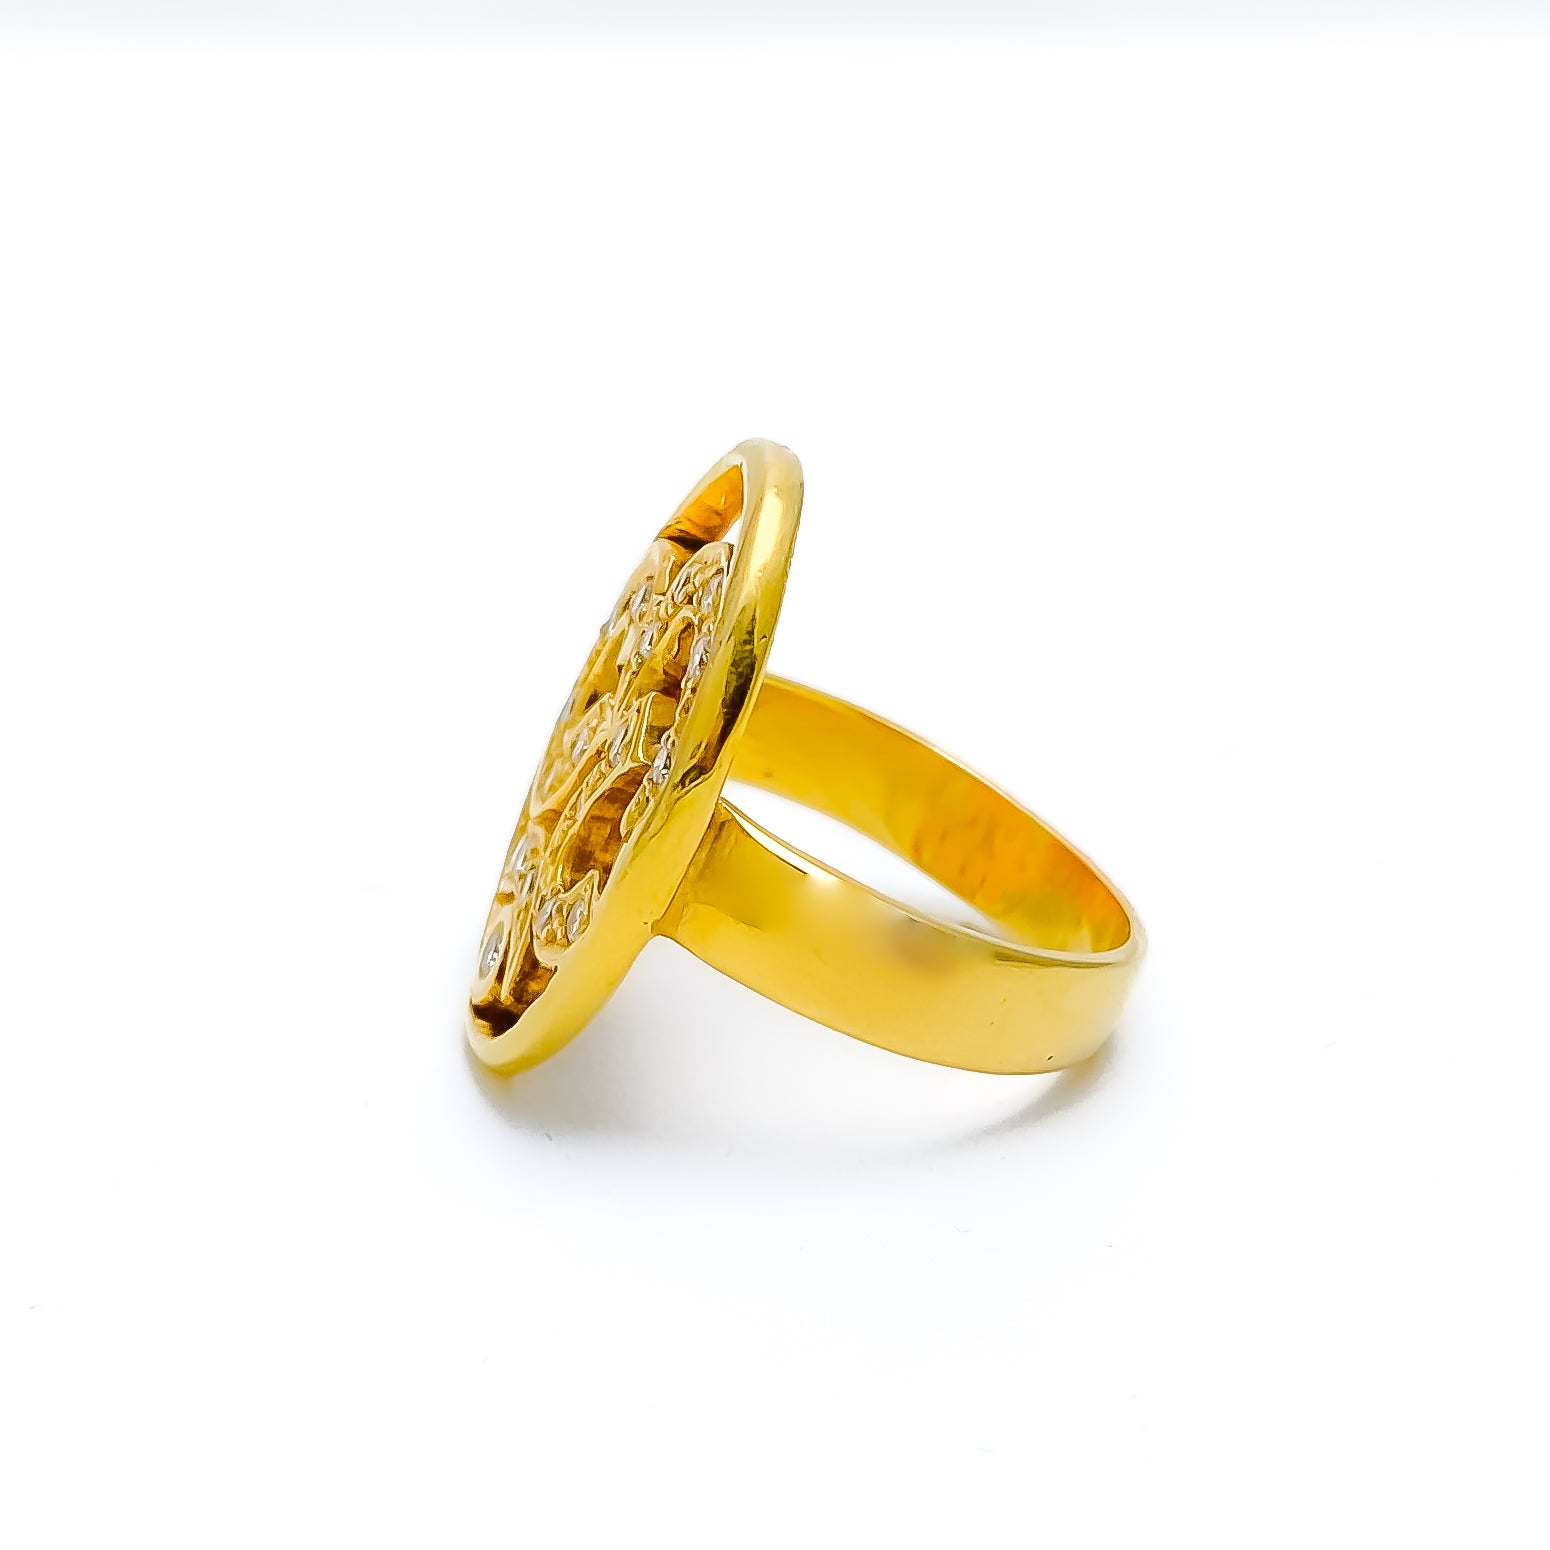 Ohm /Om Ring In (Yellow/Rose/White) Gold